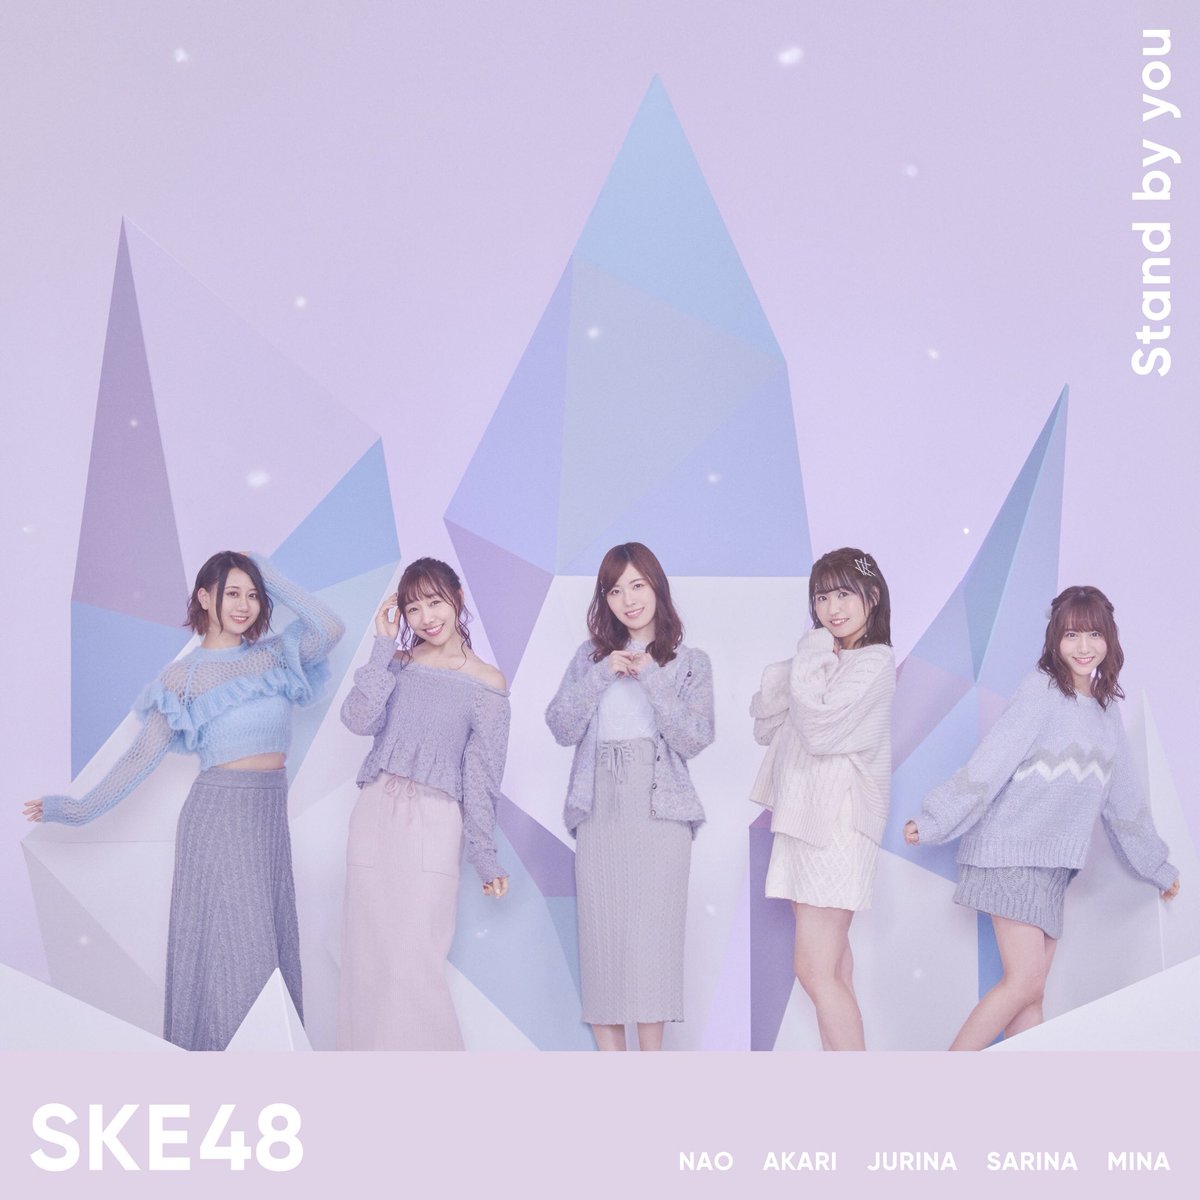 SKE48/24thシングル「Stand by you」(CD+DVD)【初回限定盤 TYPE-A】 ラムタラ特典：生写真付